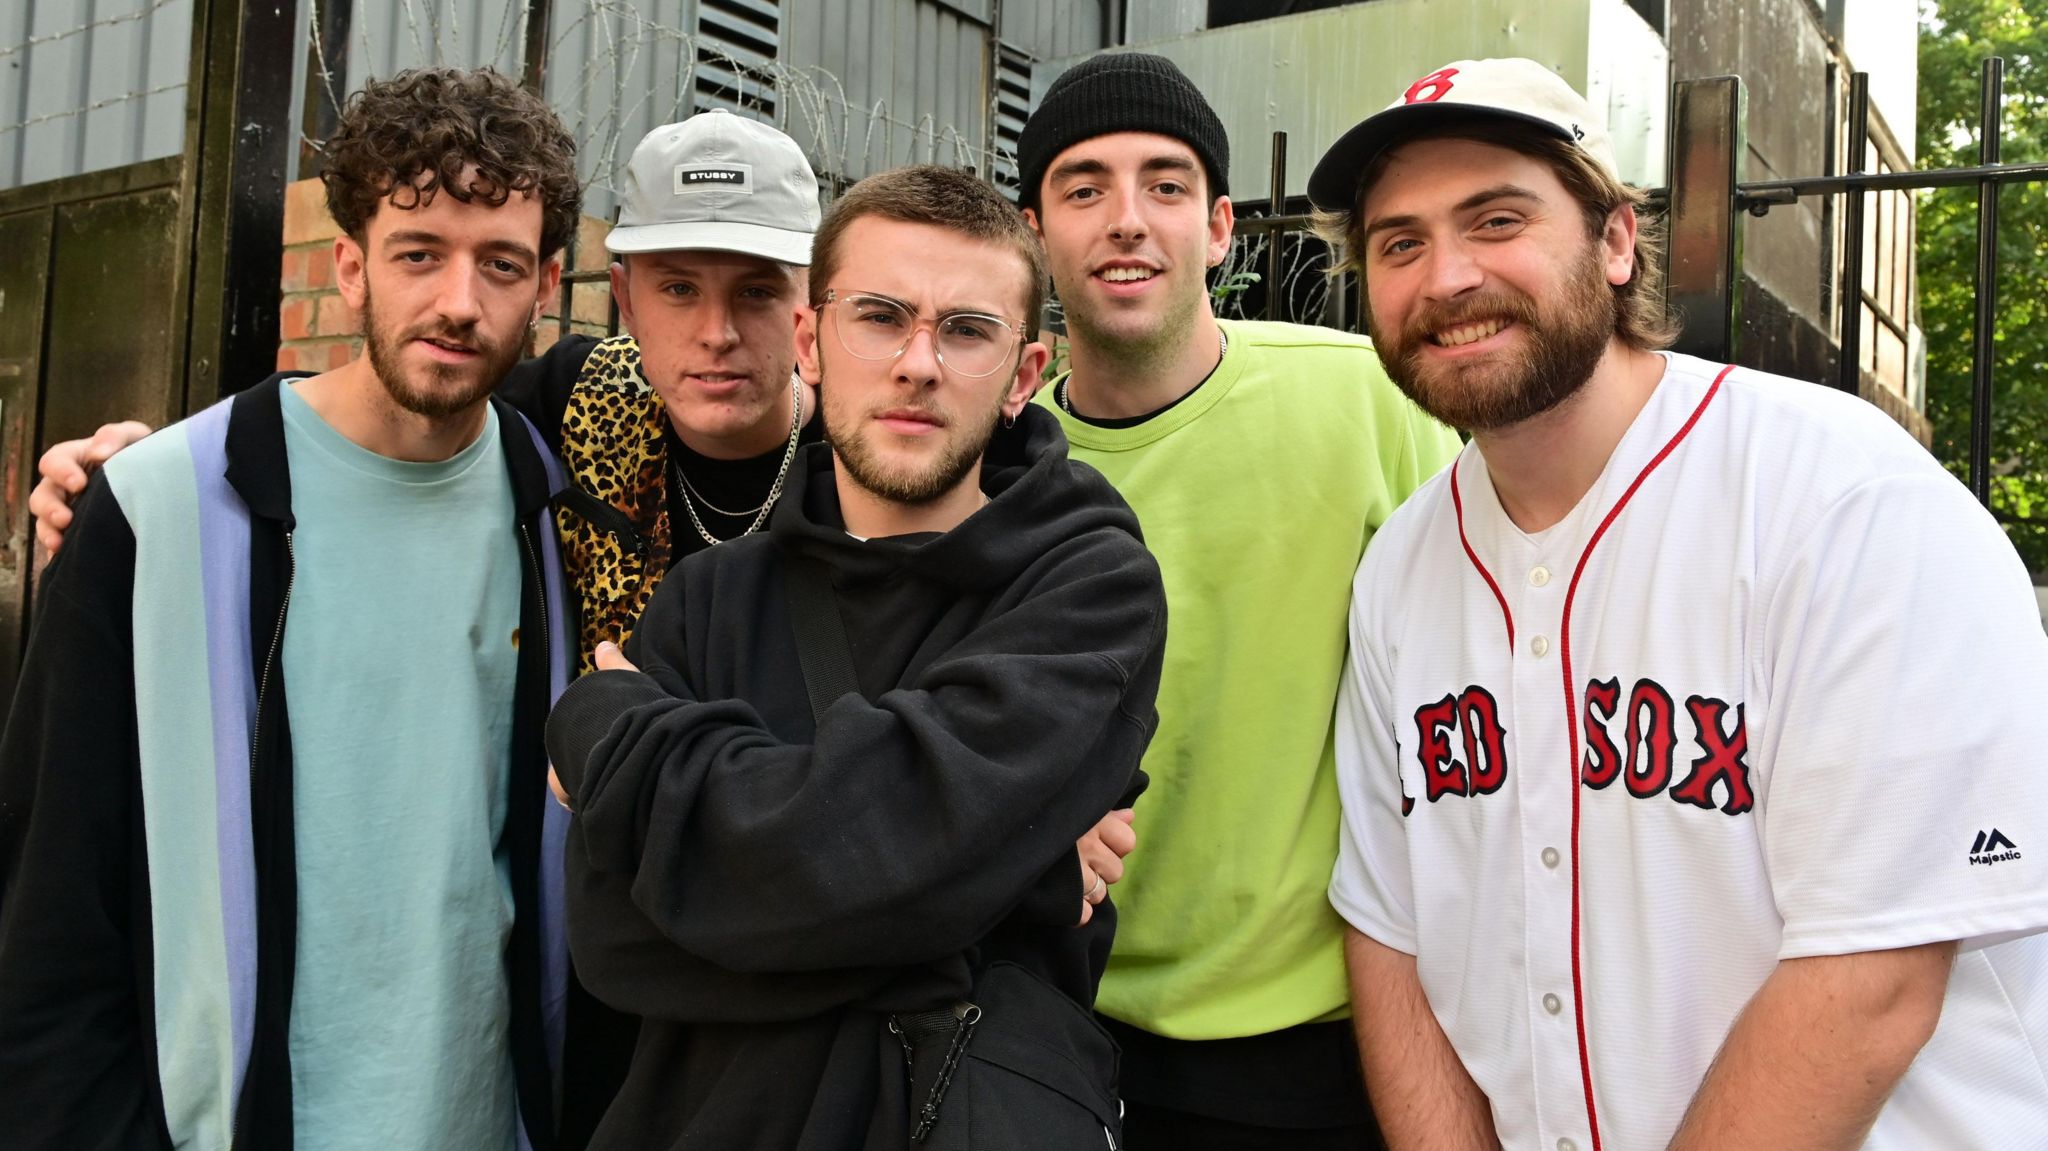 Easy Life (Murray Matravers: Vox, Keys, Trumpet, Samuel HewittBass, Moog, Sax, Oliver Cassidy: Drums, Jordan Birtles: Keys, Percussion, Lewis Berry: Guitar) perform a live session for Radio 1's Annie Mac show in Maida Vale studio 4 on Weds. 31 July 2019.